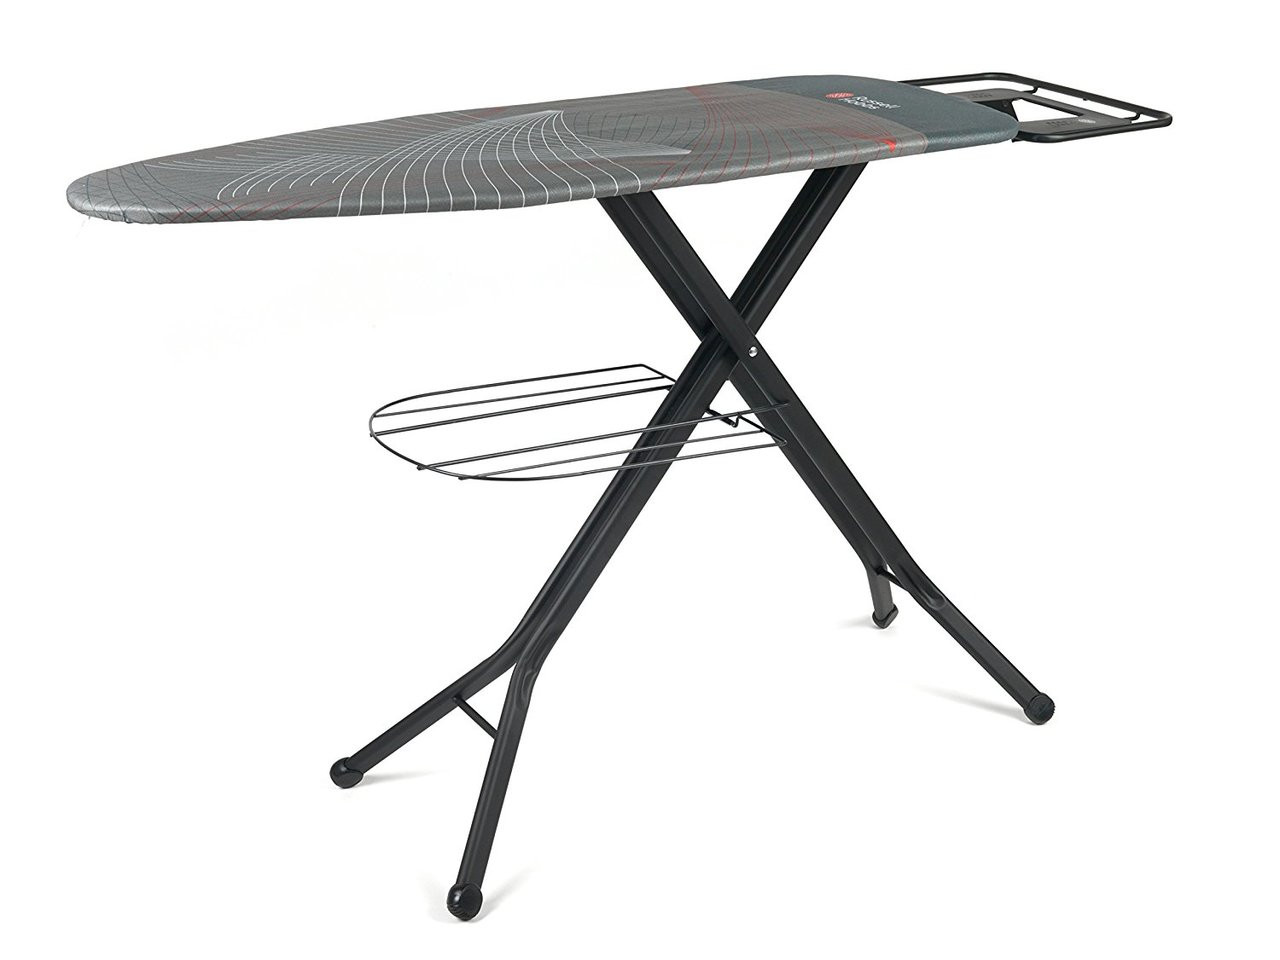 An image of Russell Hobbs SPIRO 126 x 45 Ironing Board